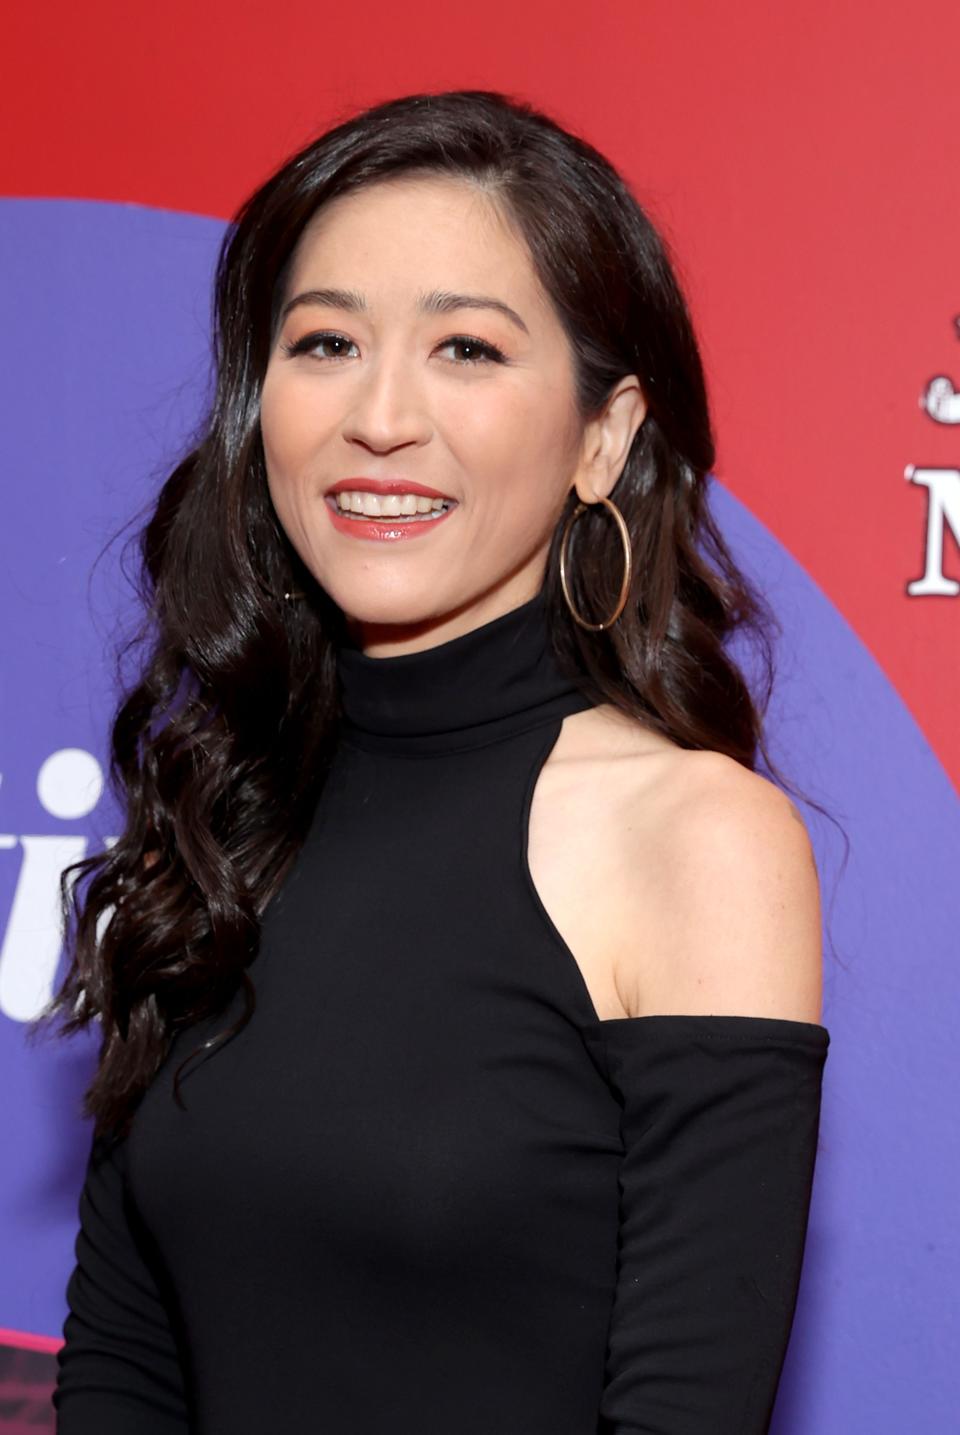 ESPN analyst Mina Kimes responds to sexist email from troll. (Photo: Getty Images)